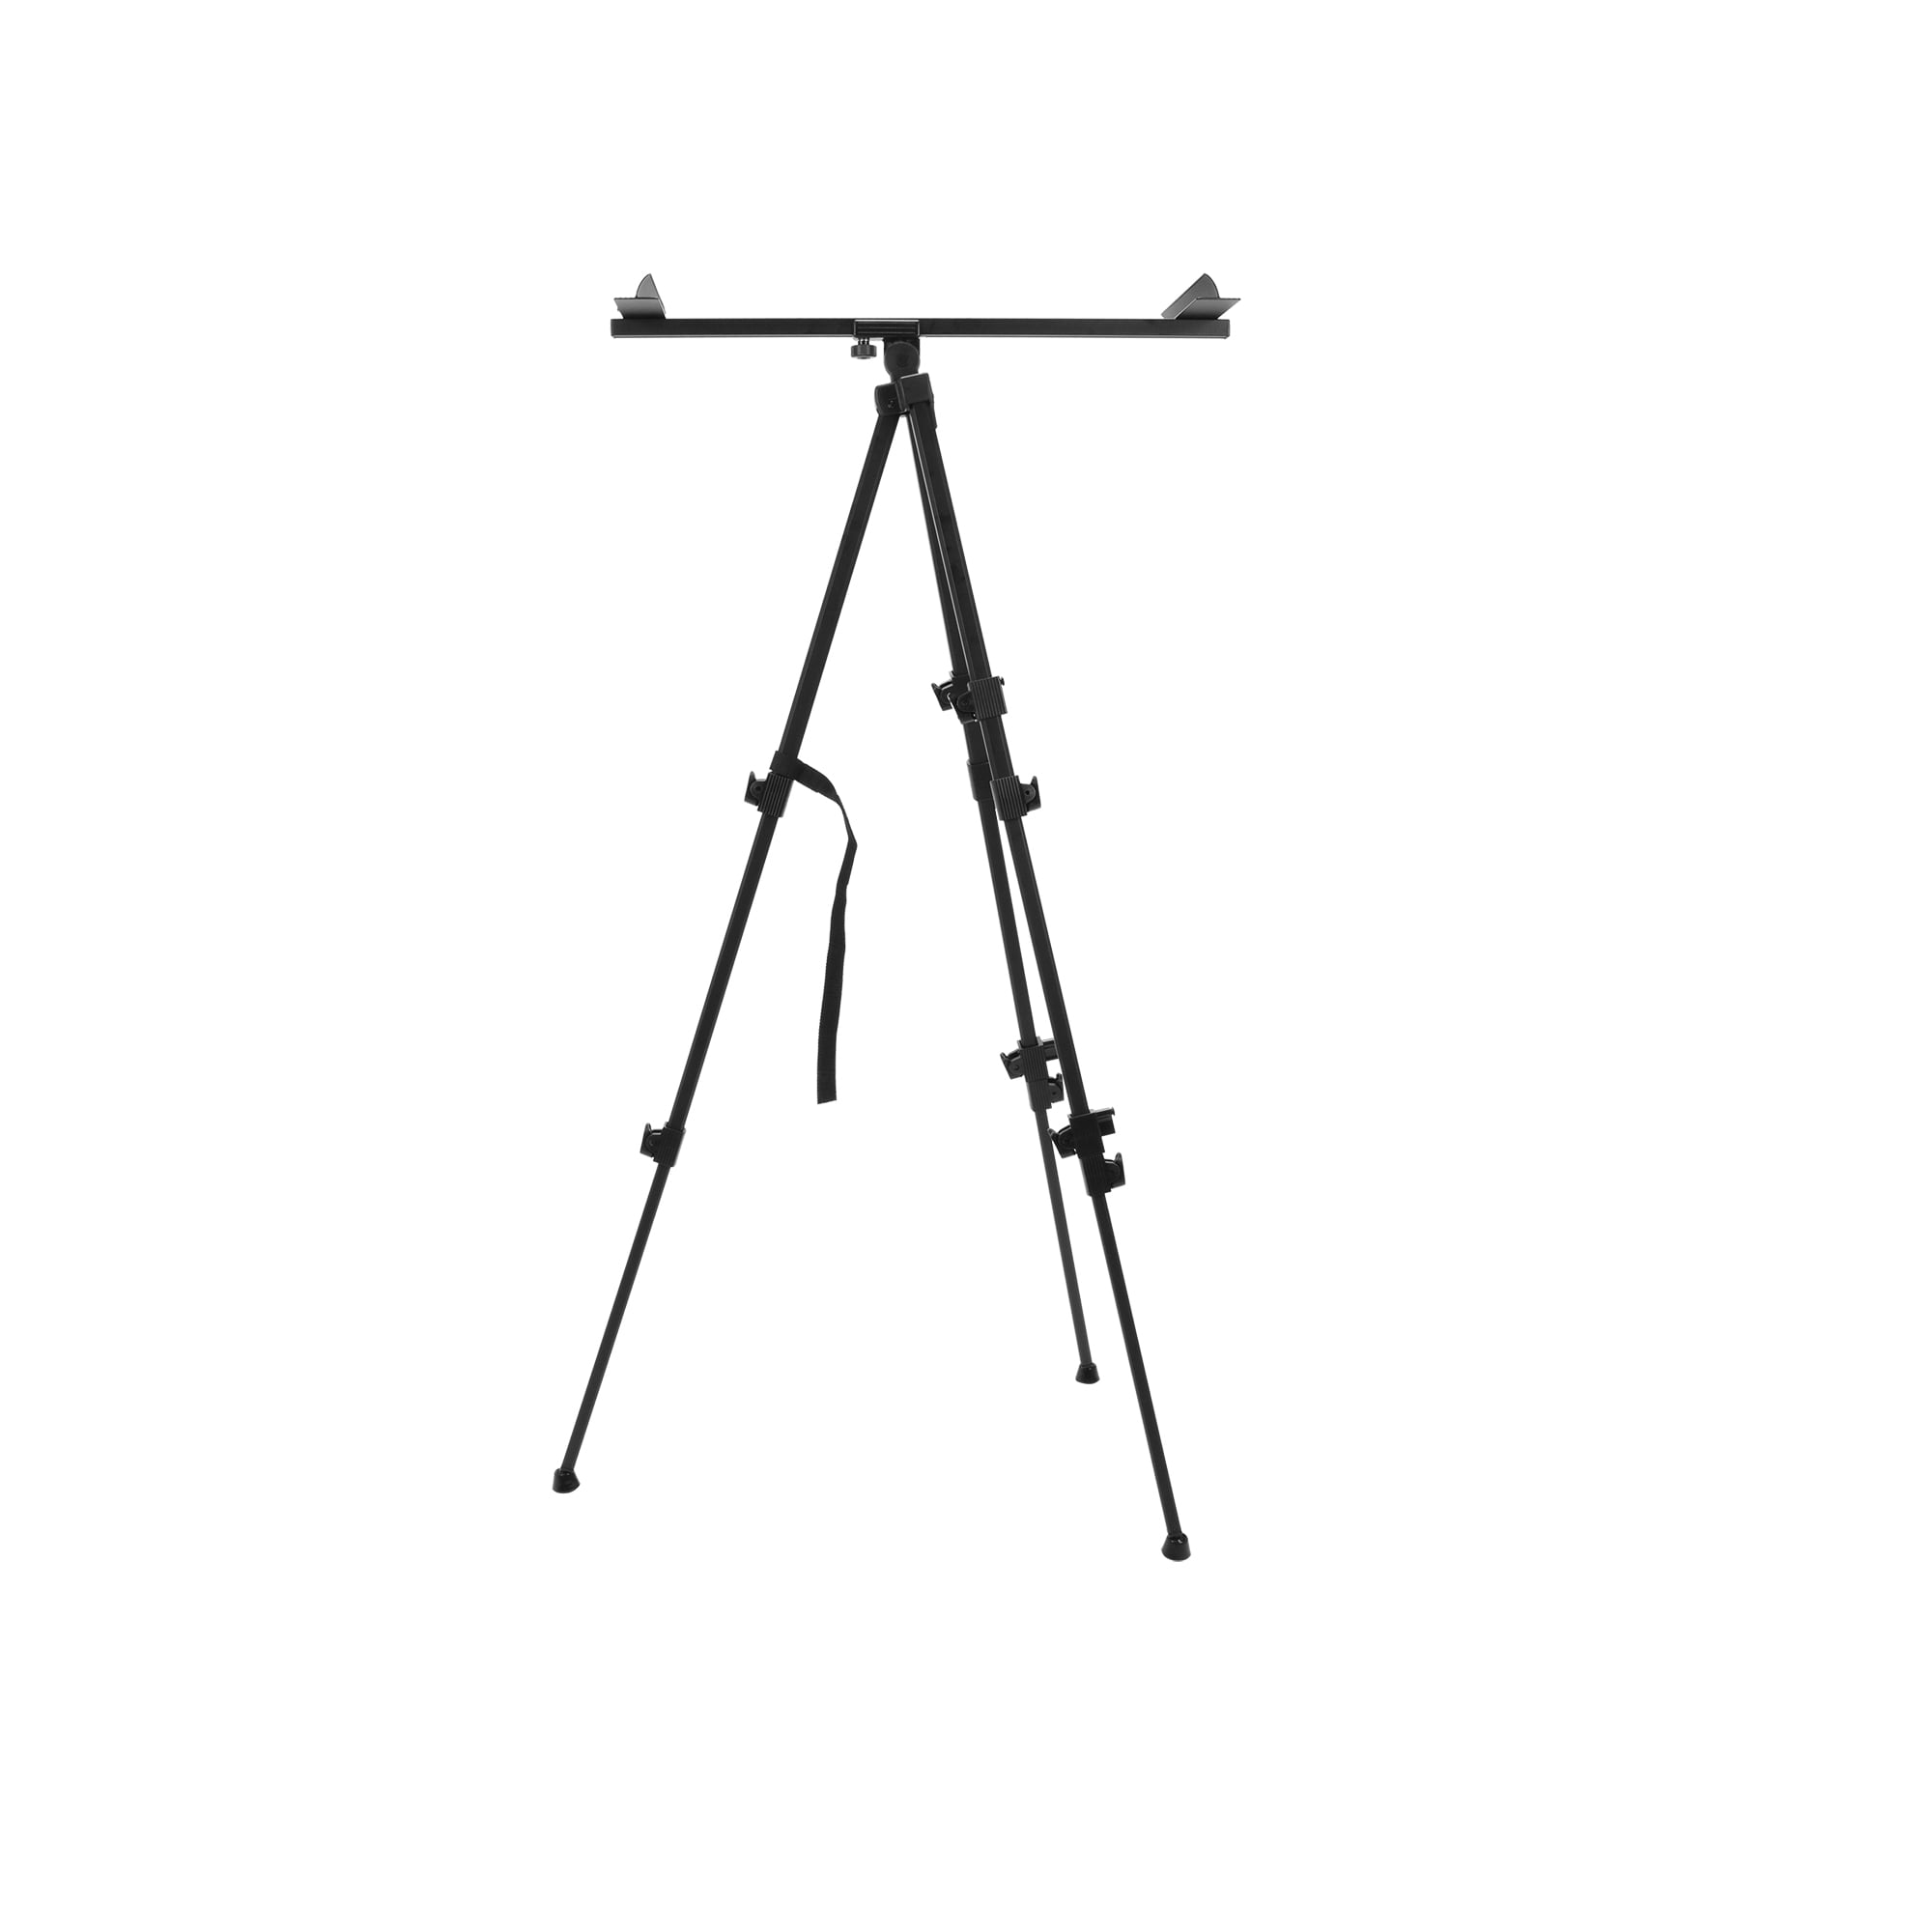 Watercolor Filed Easel For Painting, Vertical To Horizontal Aluminum Easels  With Adjustable Tripod, Display Stand Easel With Portable Bag For Art  Supplies - Temu